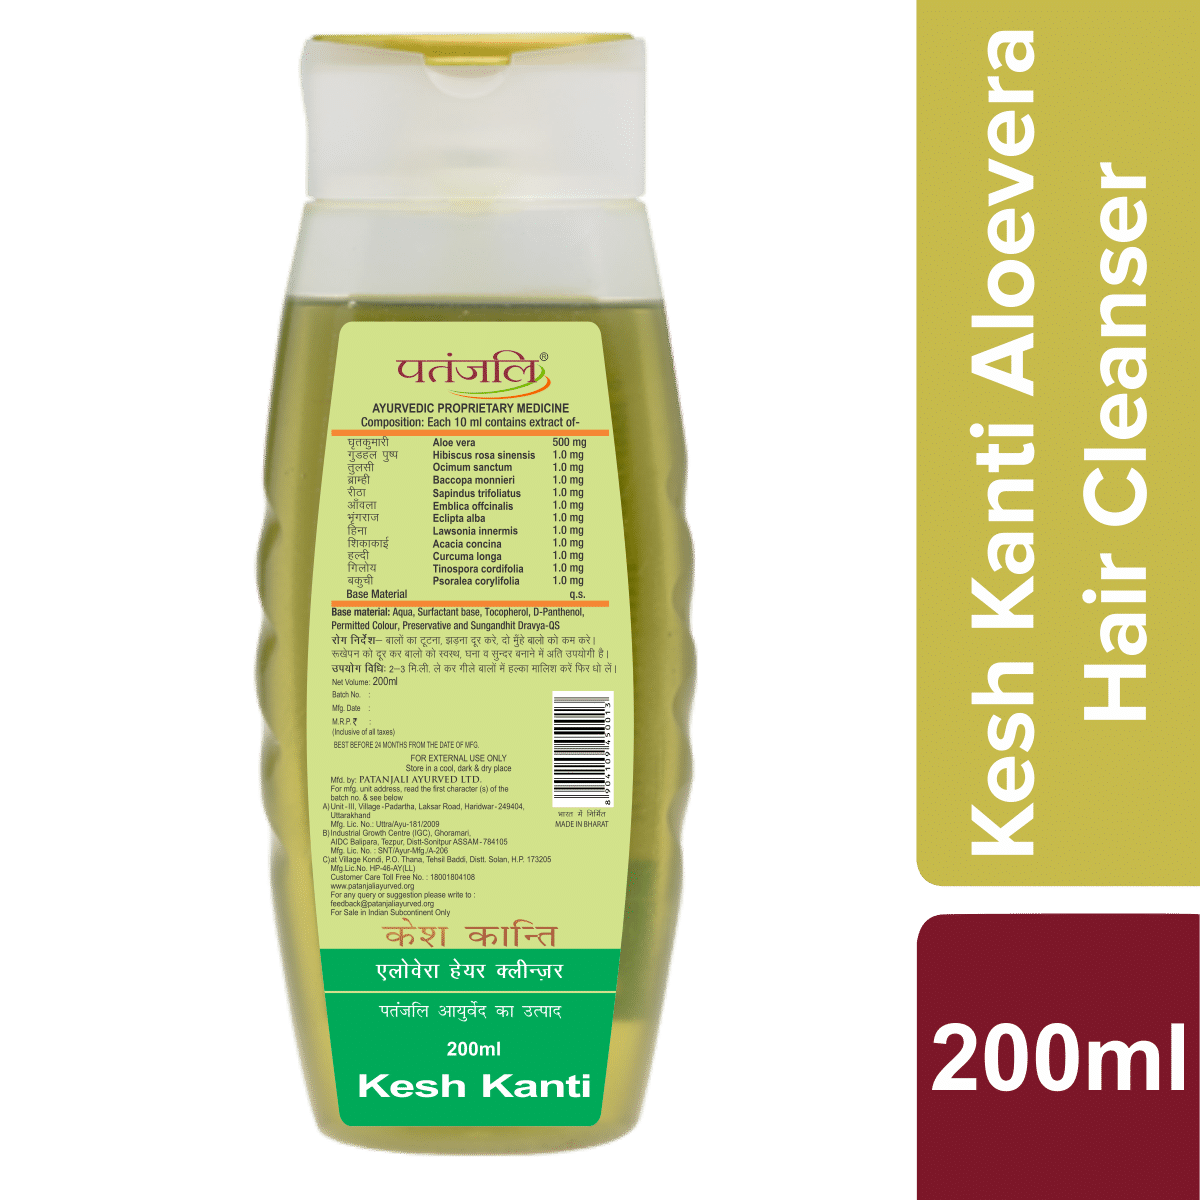 Patanjali Kesh Kanti Aloe Vera Hair Cleanser, 200 ml Price, Uses, Side  Effects, Composition - Apollo Pharmacy